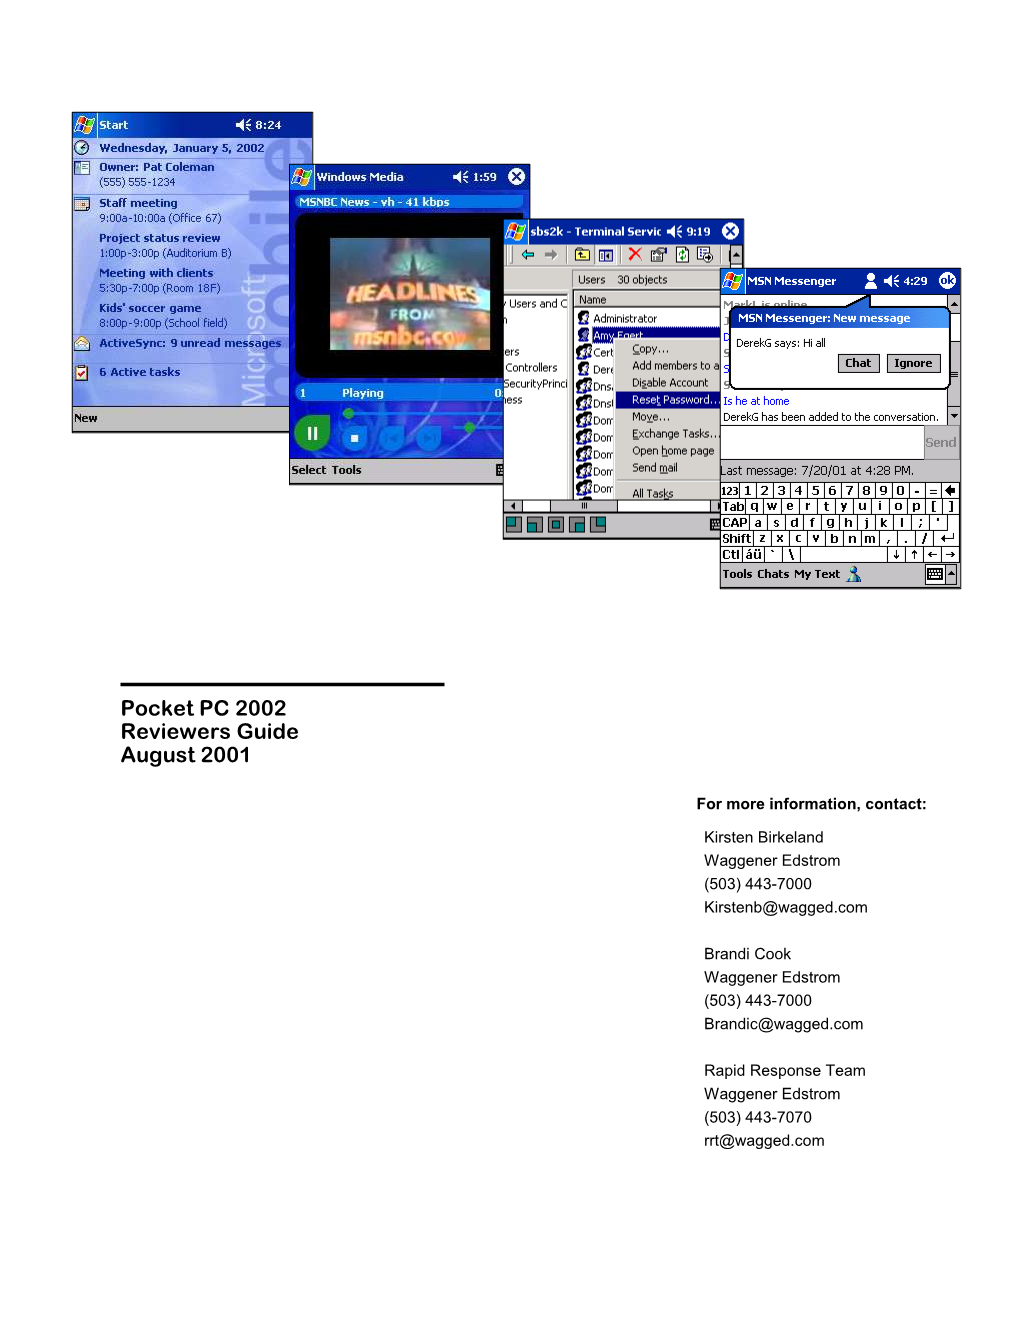 Pocket PC 2002 Reviewers Guide August 2001